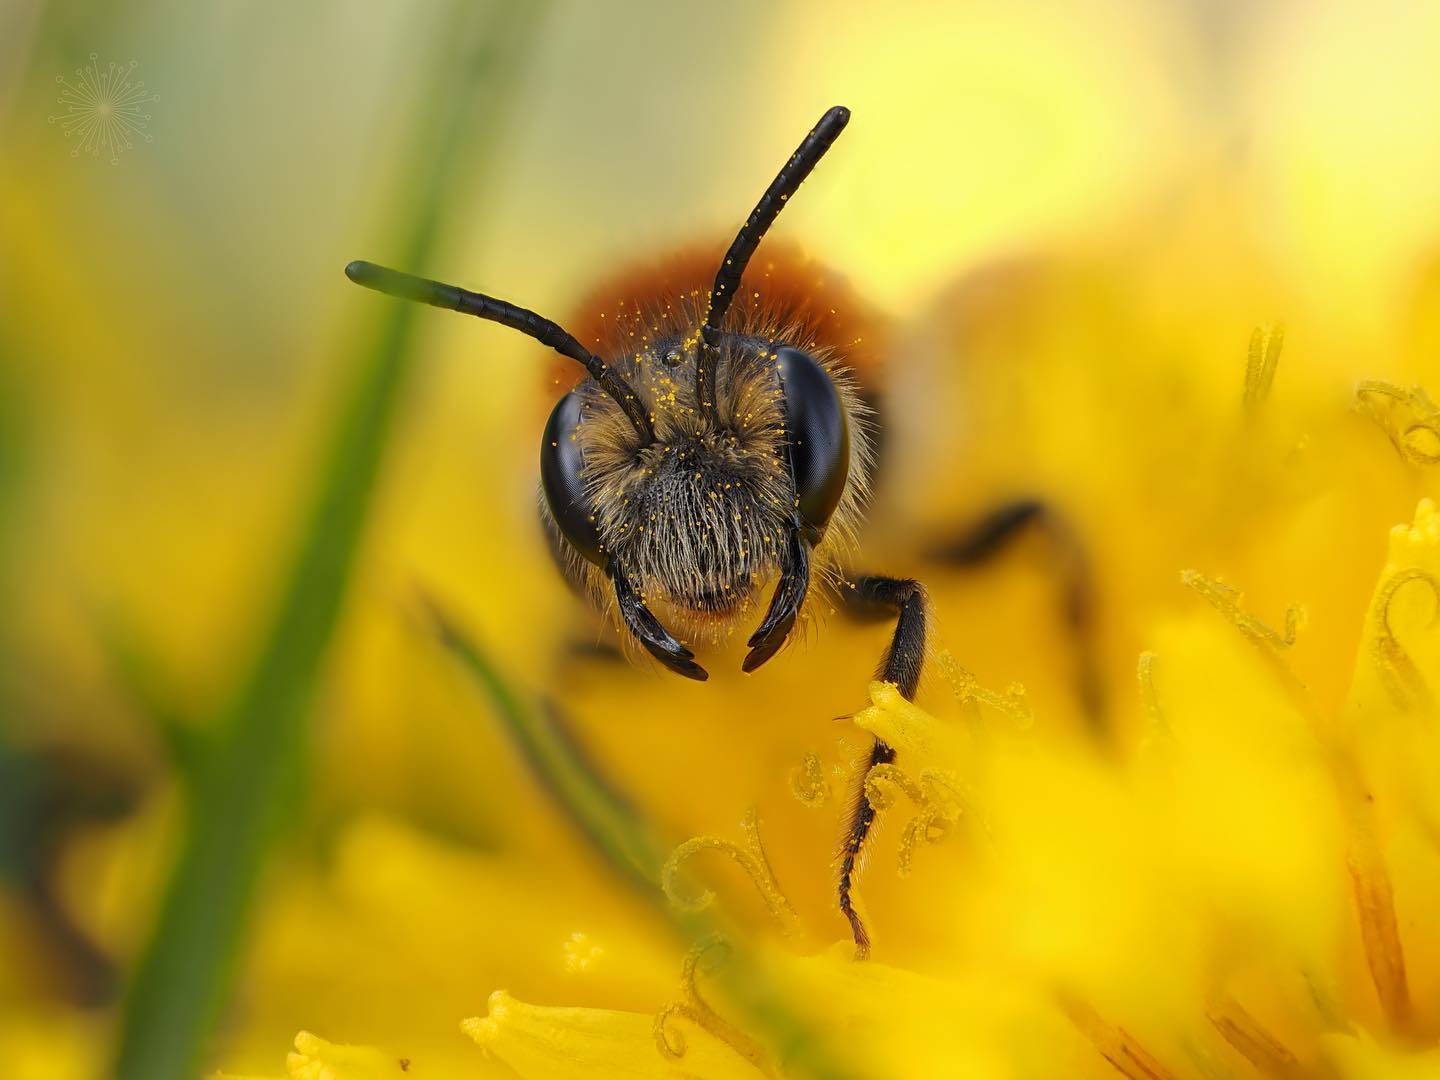 Extreme close up of a mining bee